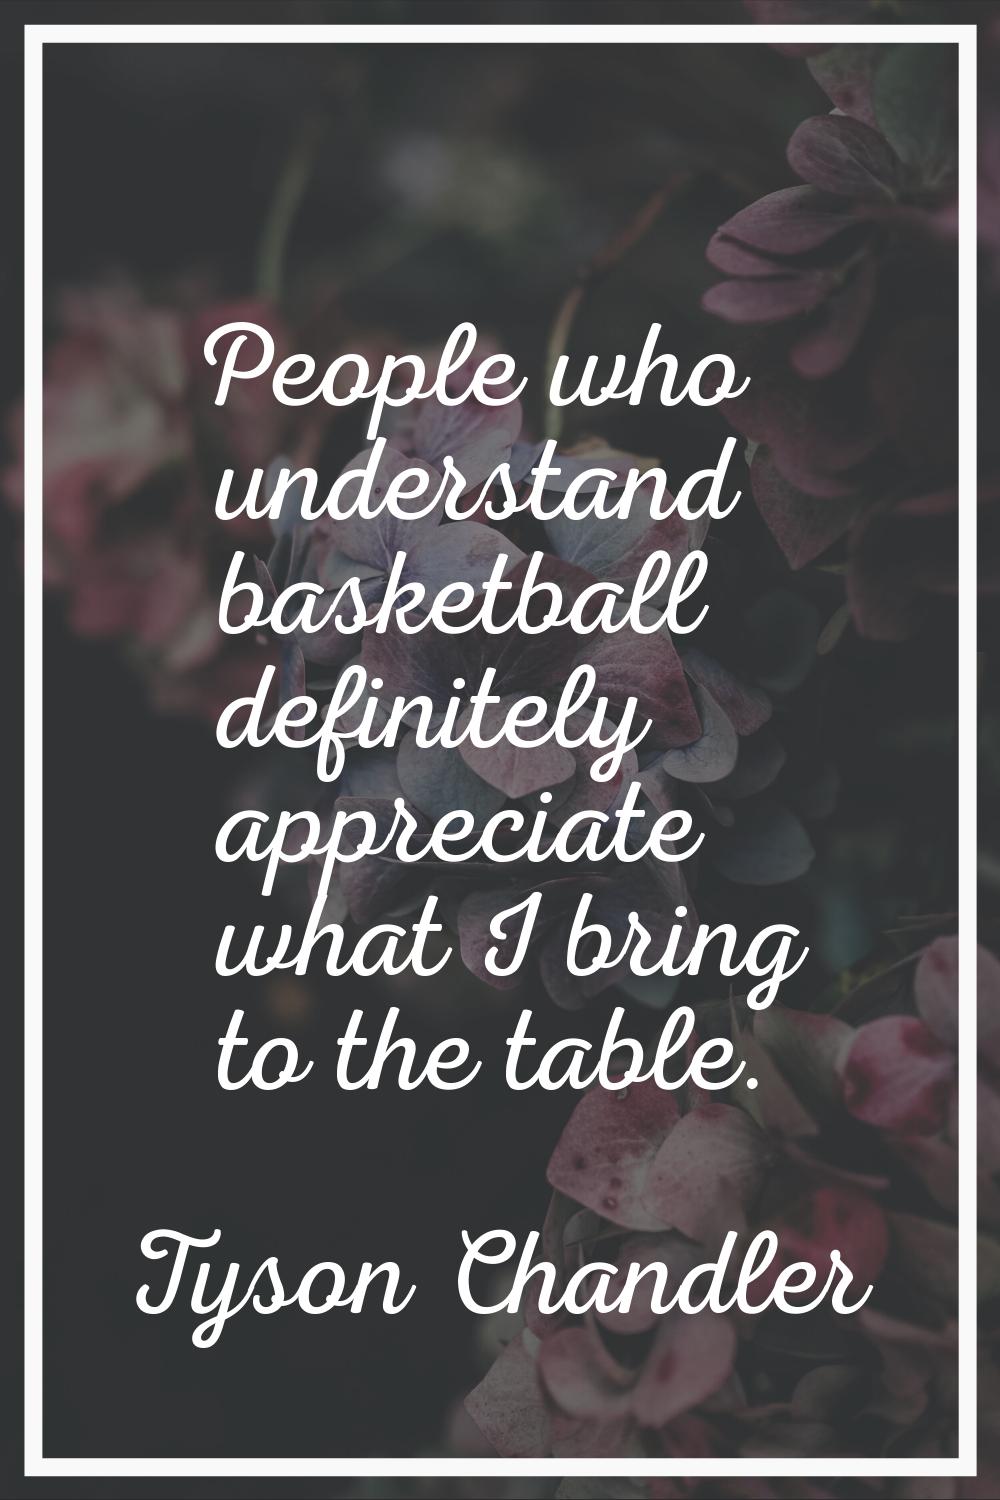 People who understand basketball definitely appreciate what I bring to the table.